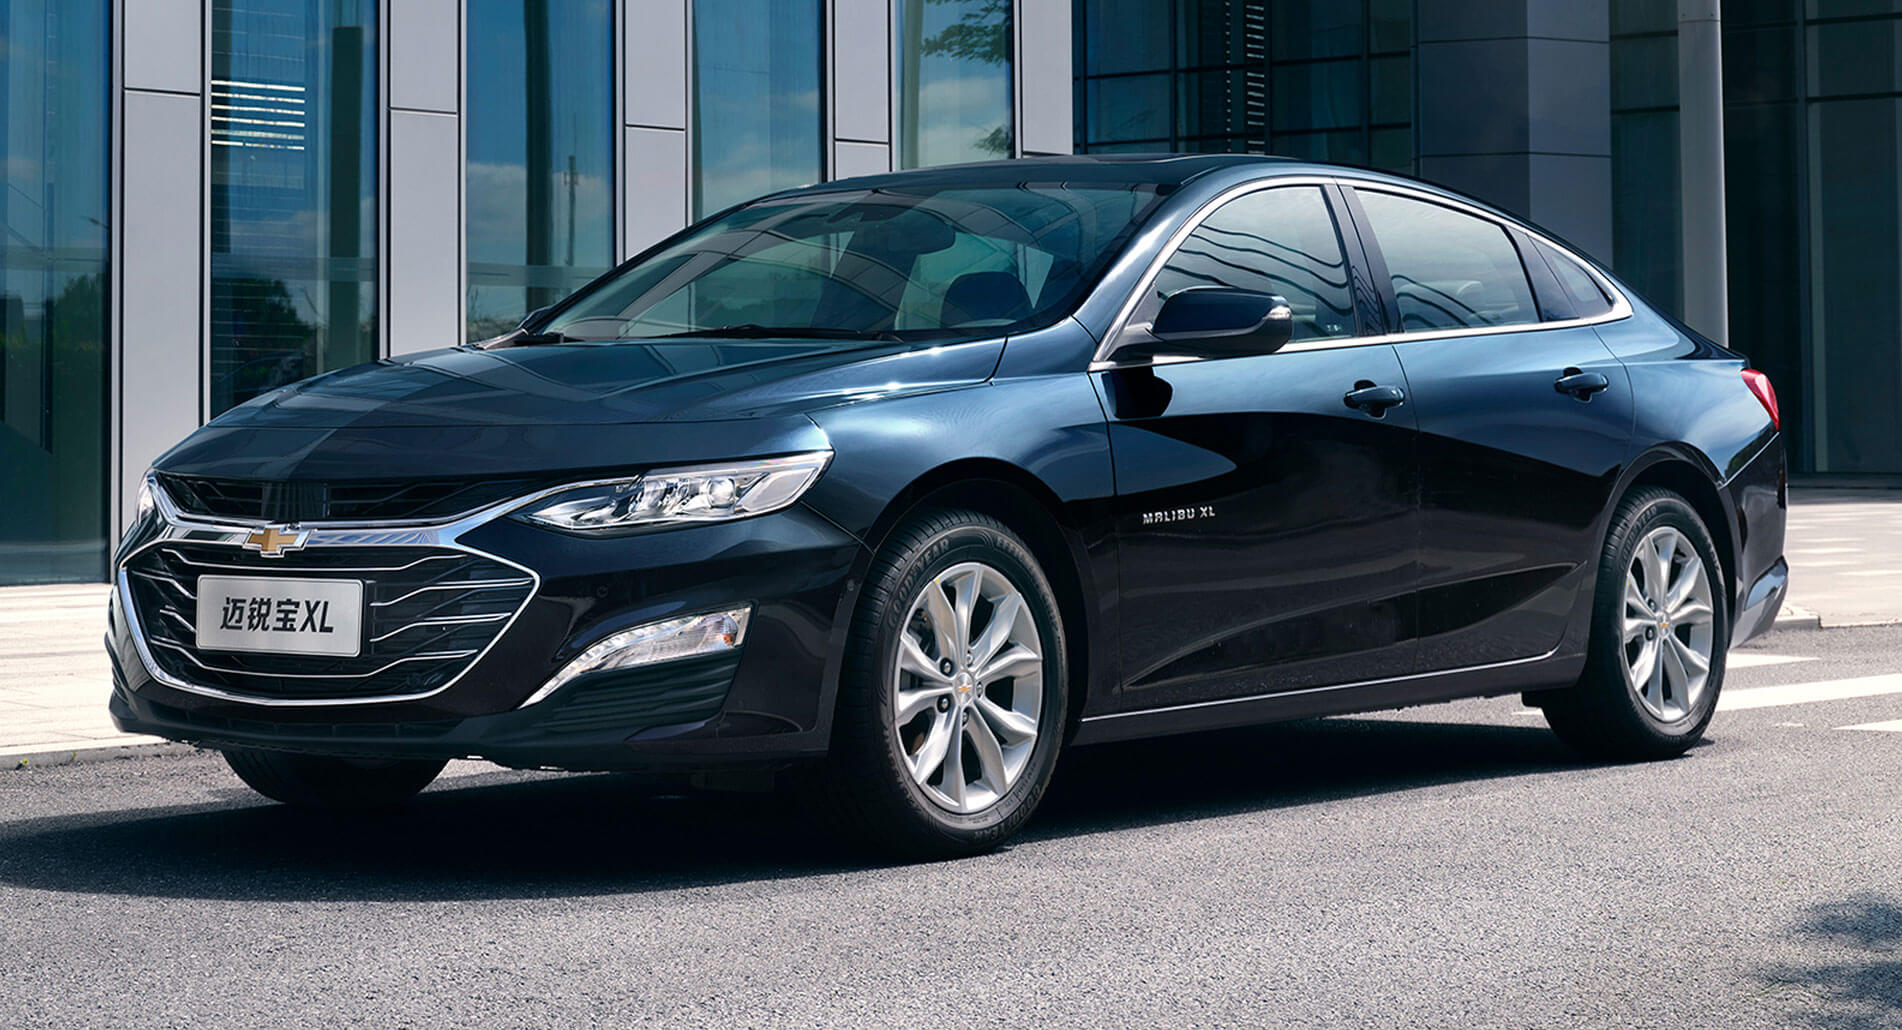 All-New 2021 Chevrolet Malibu XL from $23,915 in China – Autos Hoy